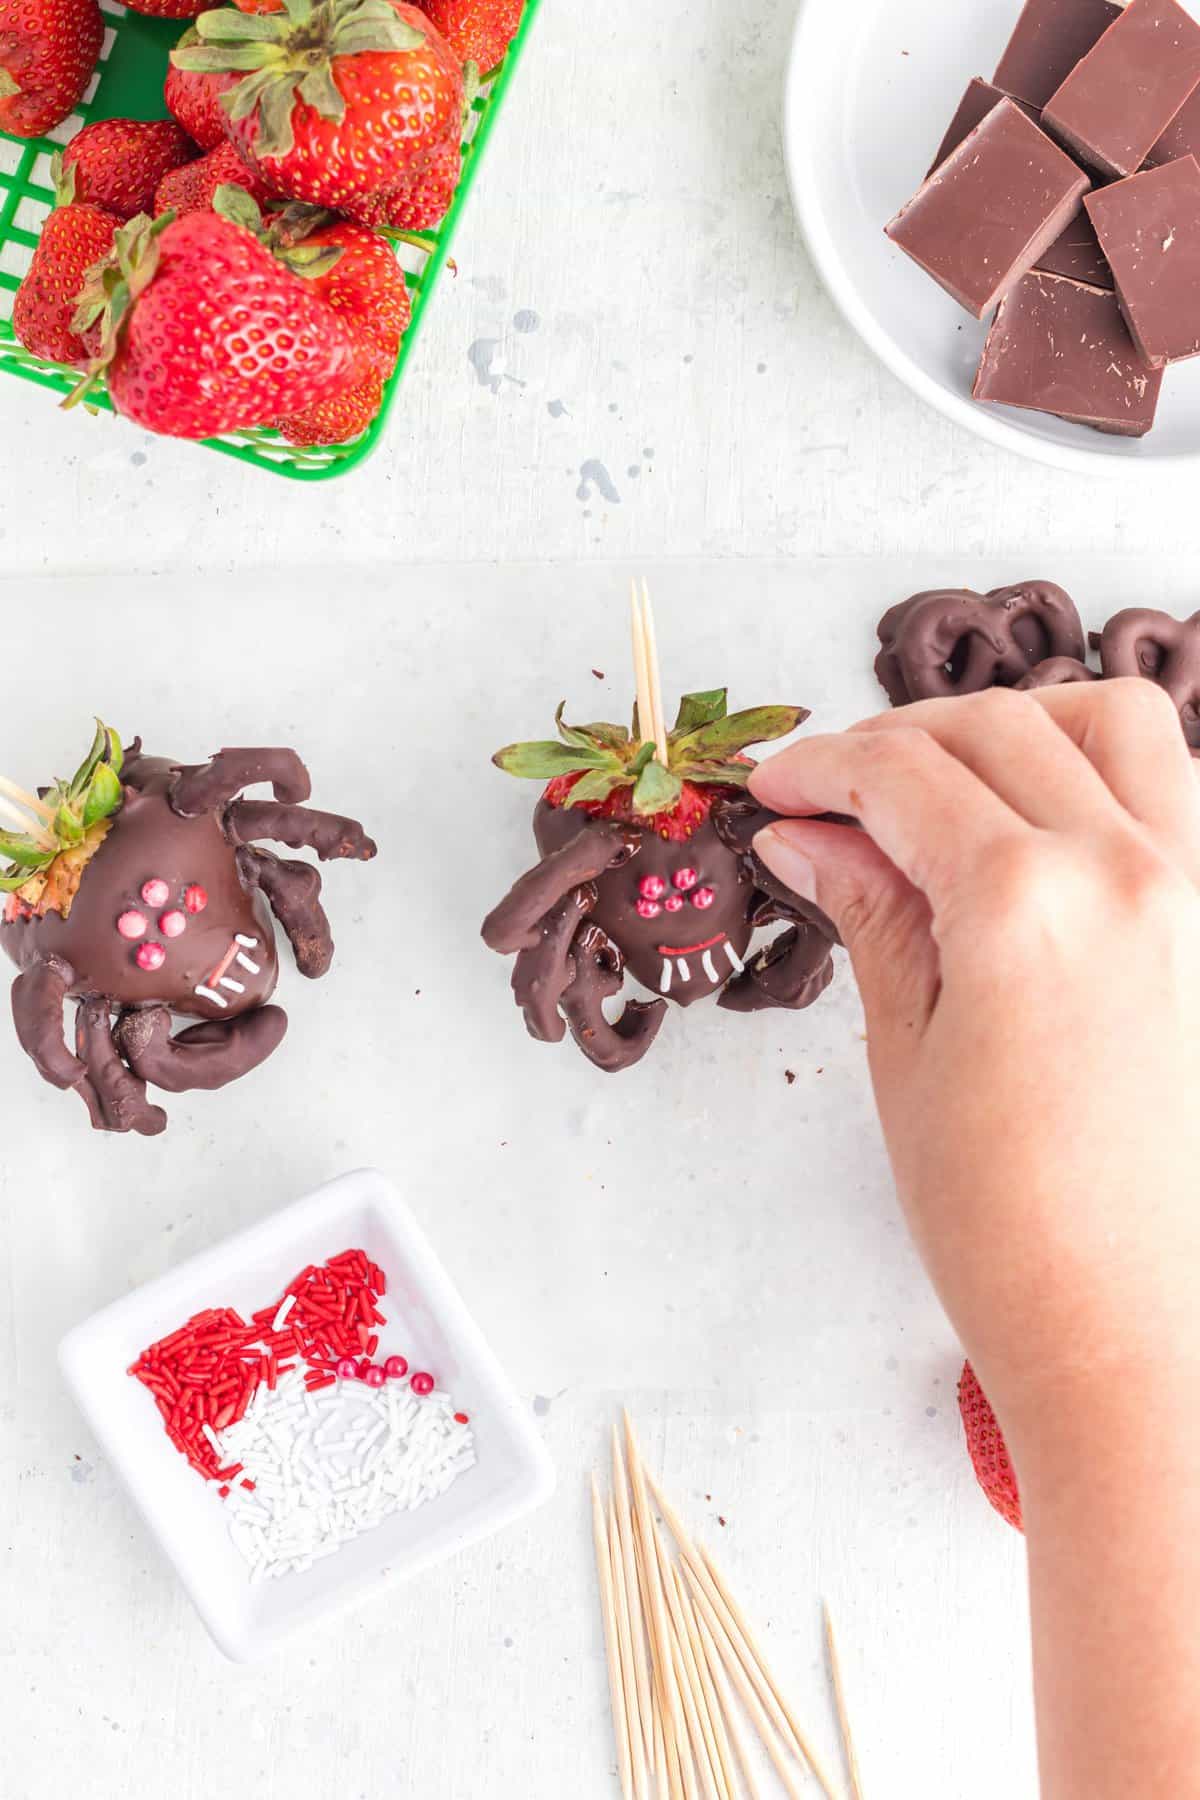 Adding the chocolate dipped pretzels as the legs to spiders body.